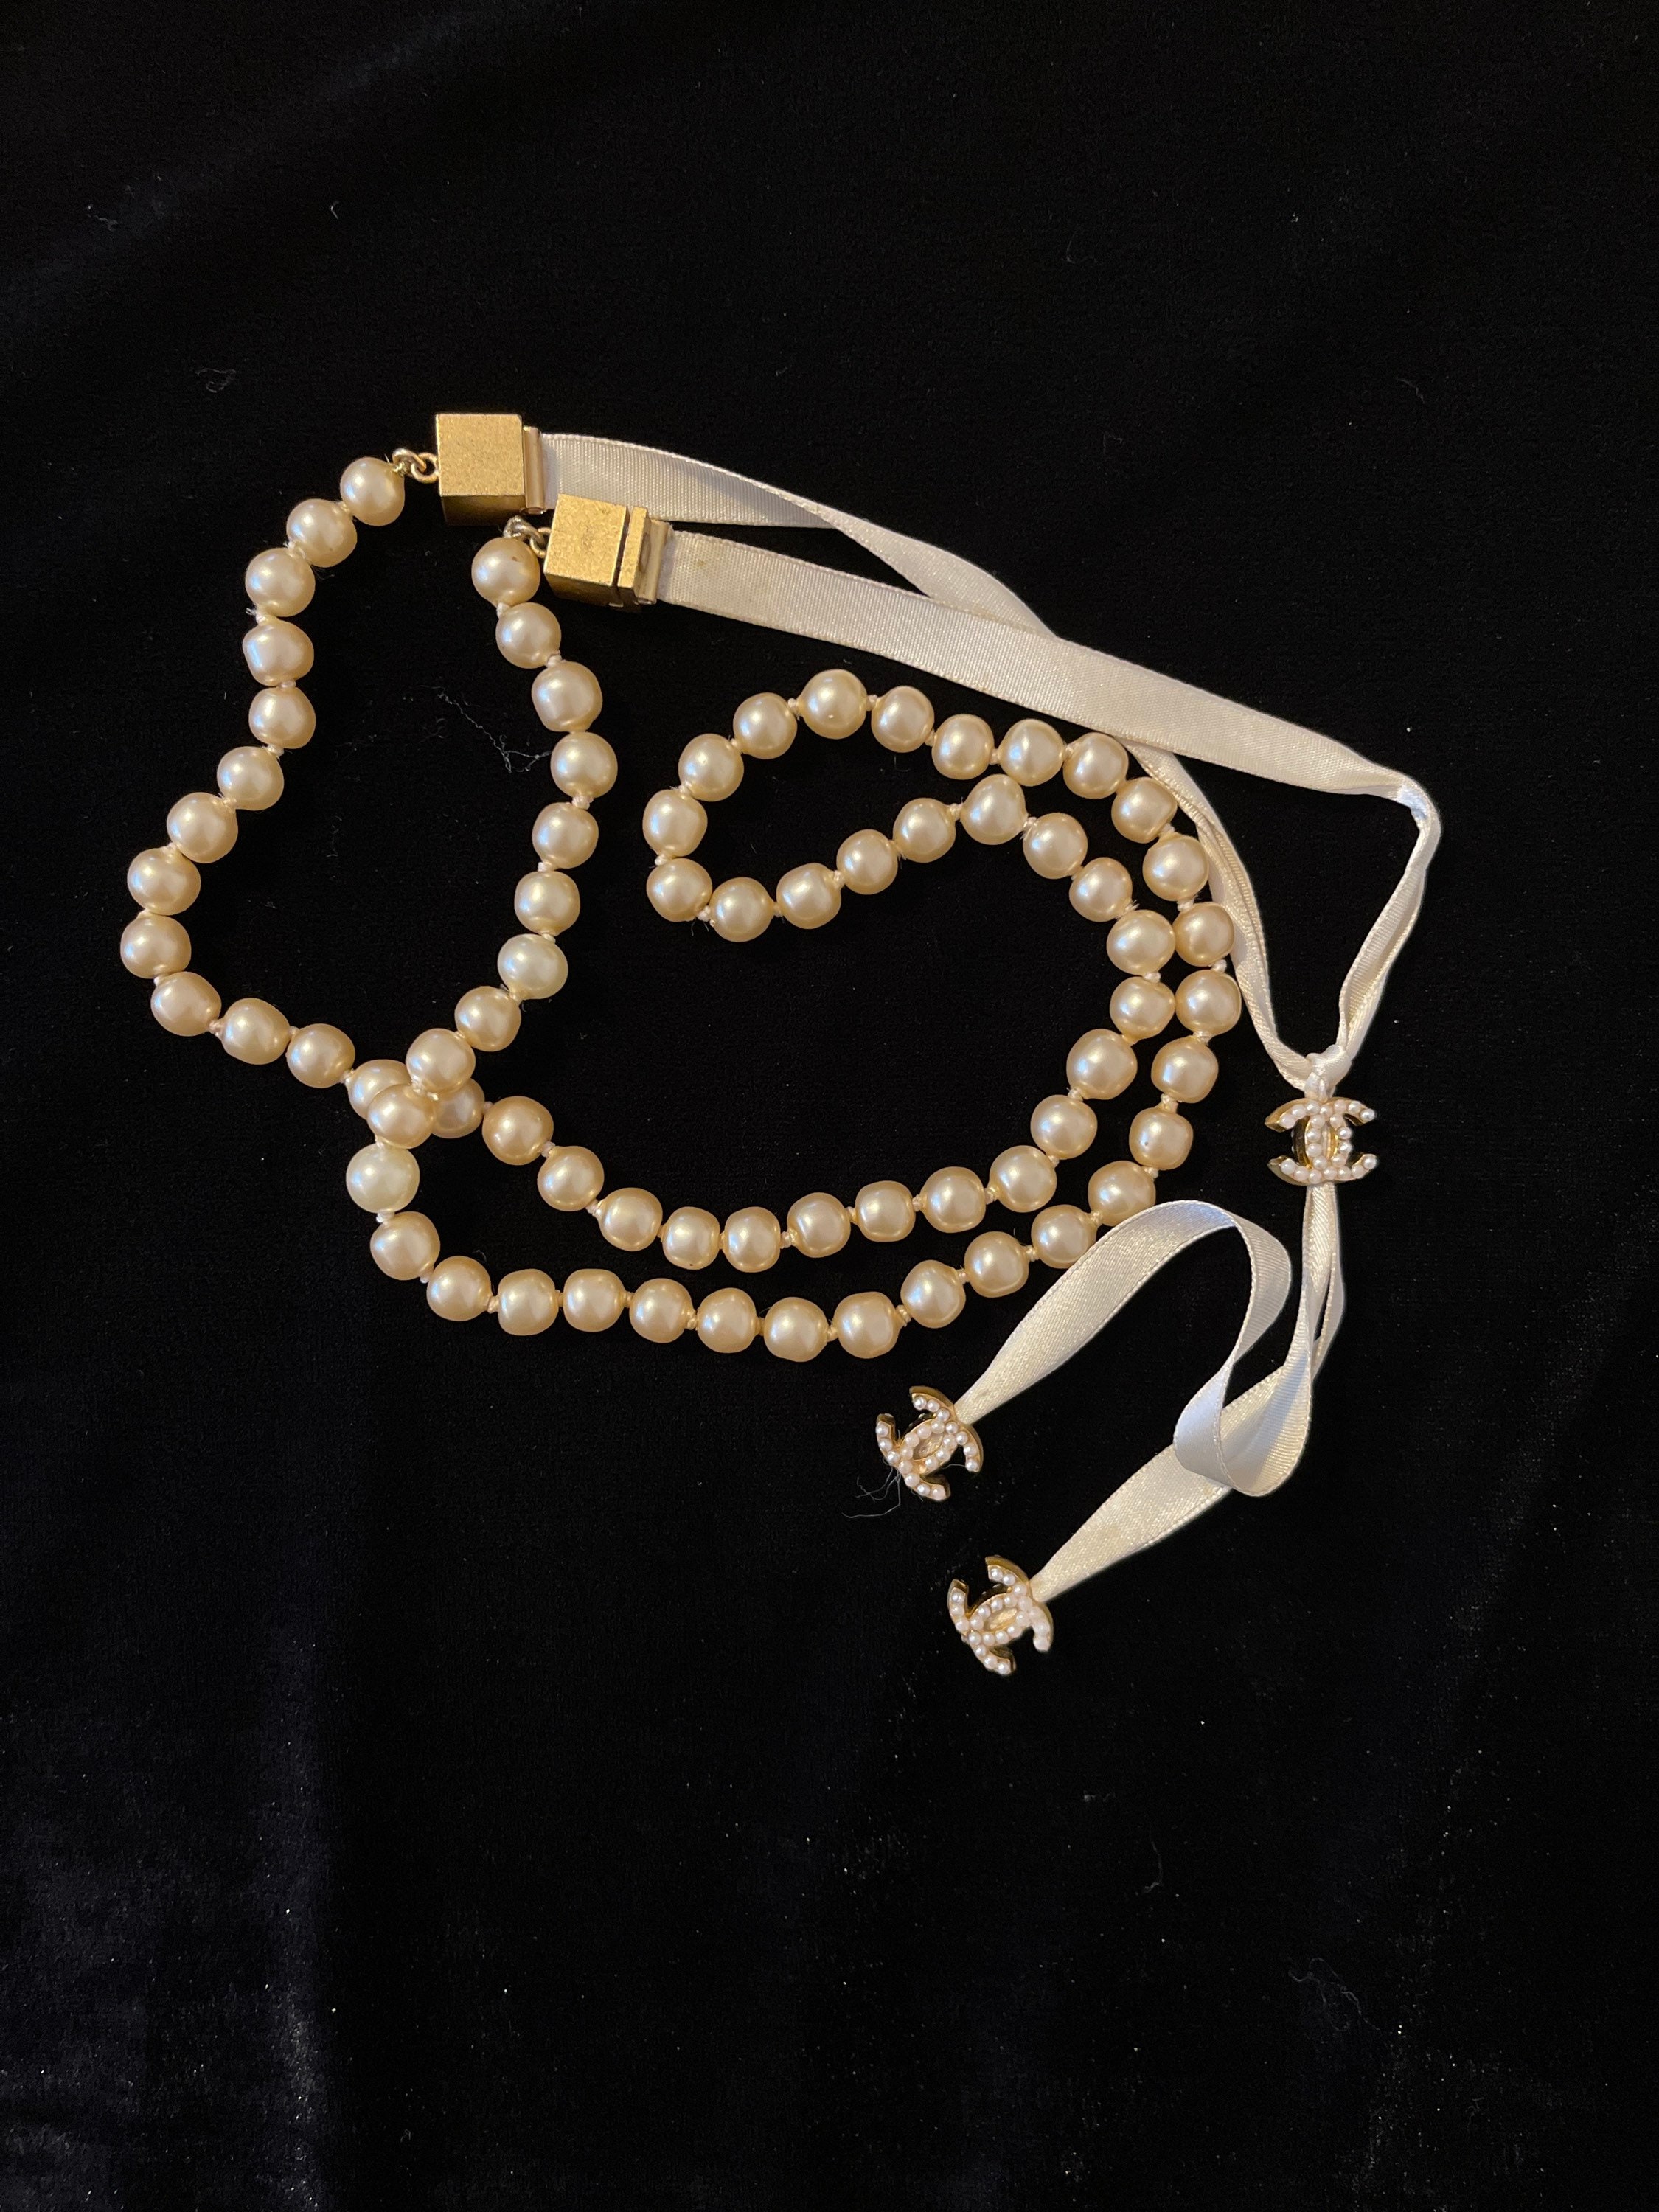 Necklace Vintage Pearls Chanel Year 2001 